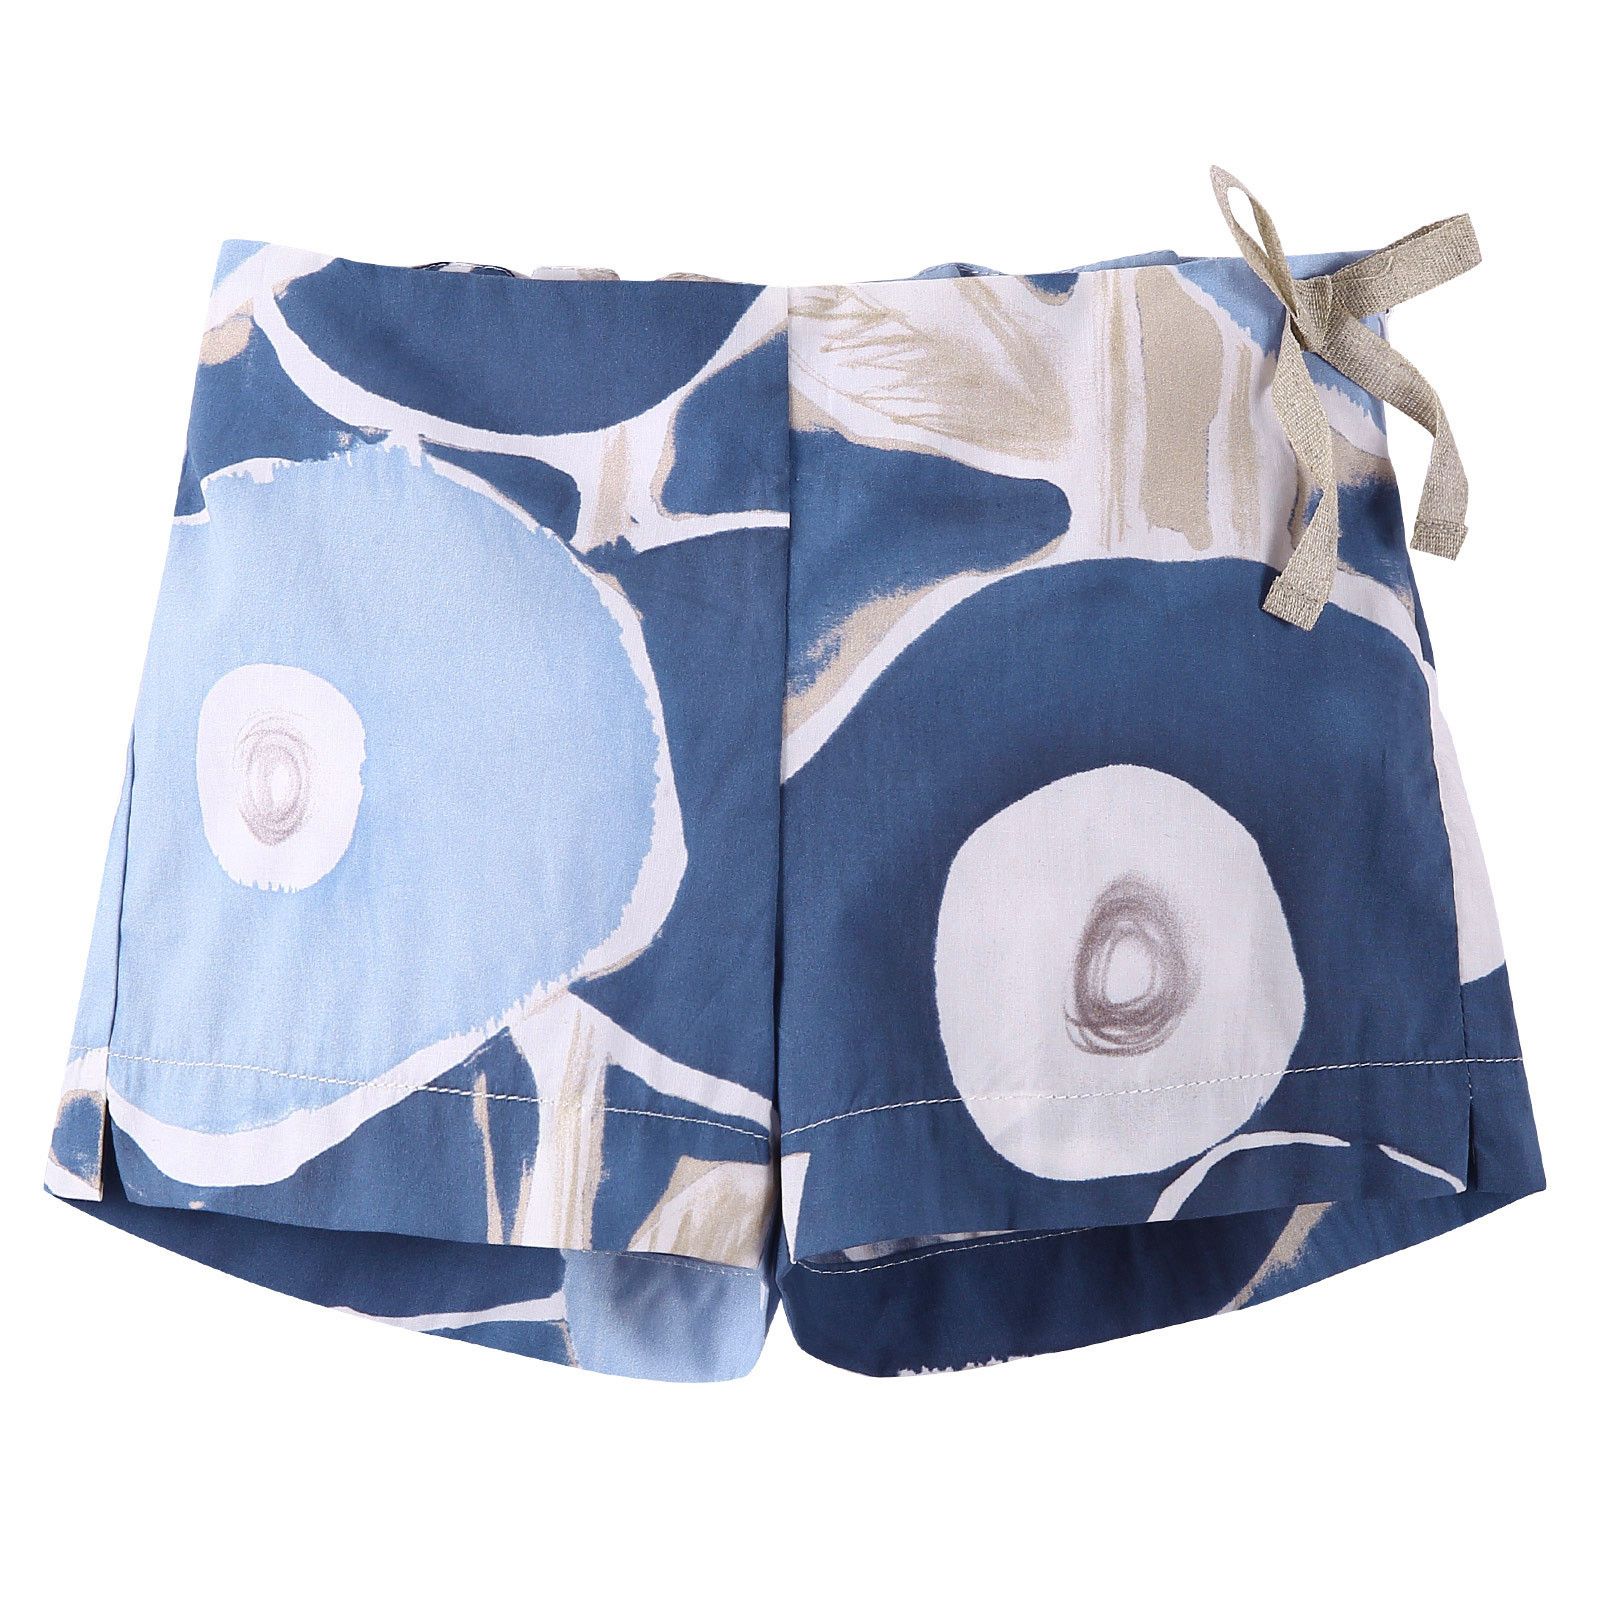 Girls Blue Printed Cotton Shorts With Bow Trims - CÉMAROSE | Children's Fashion Store - 1